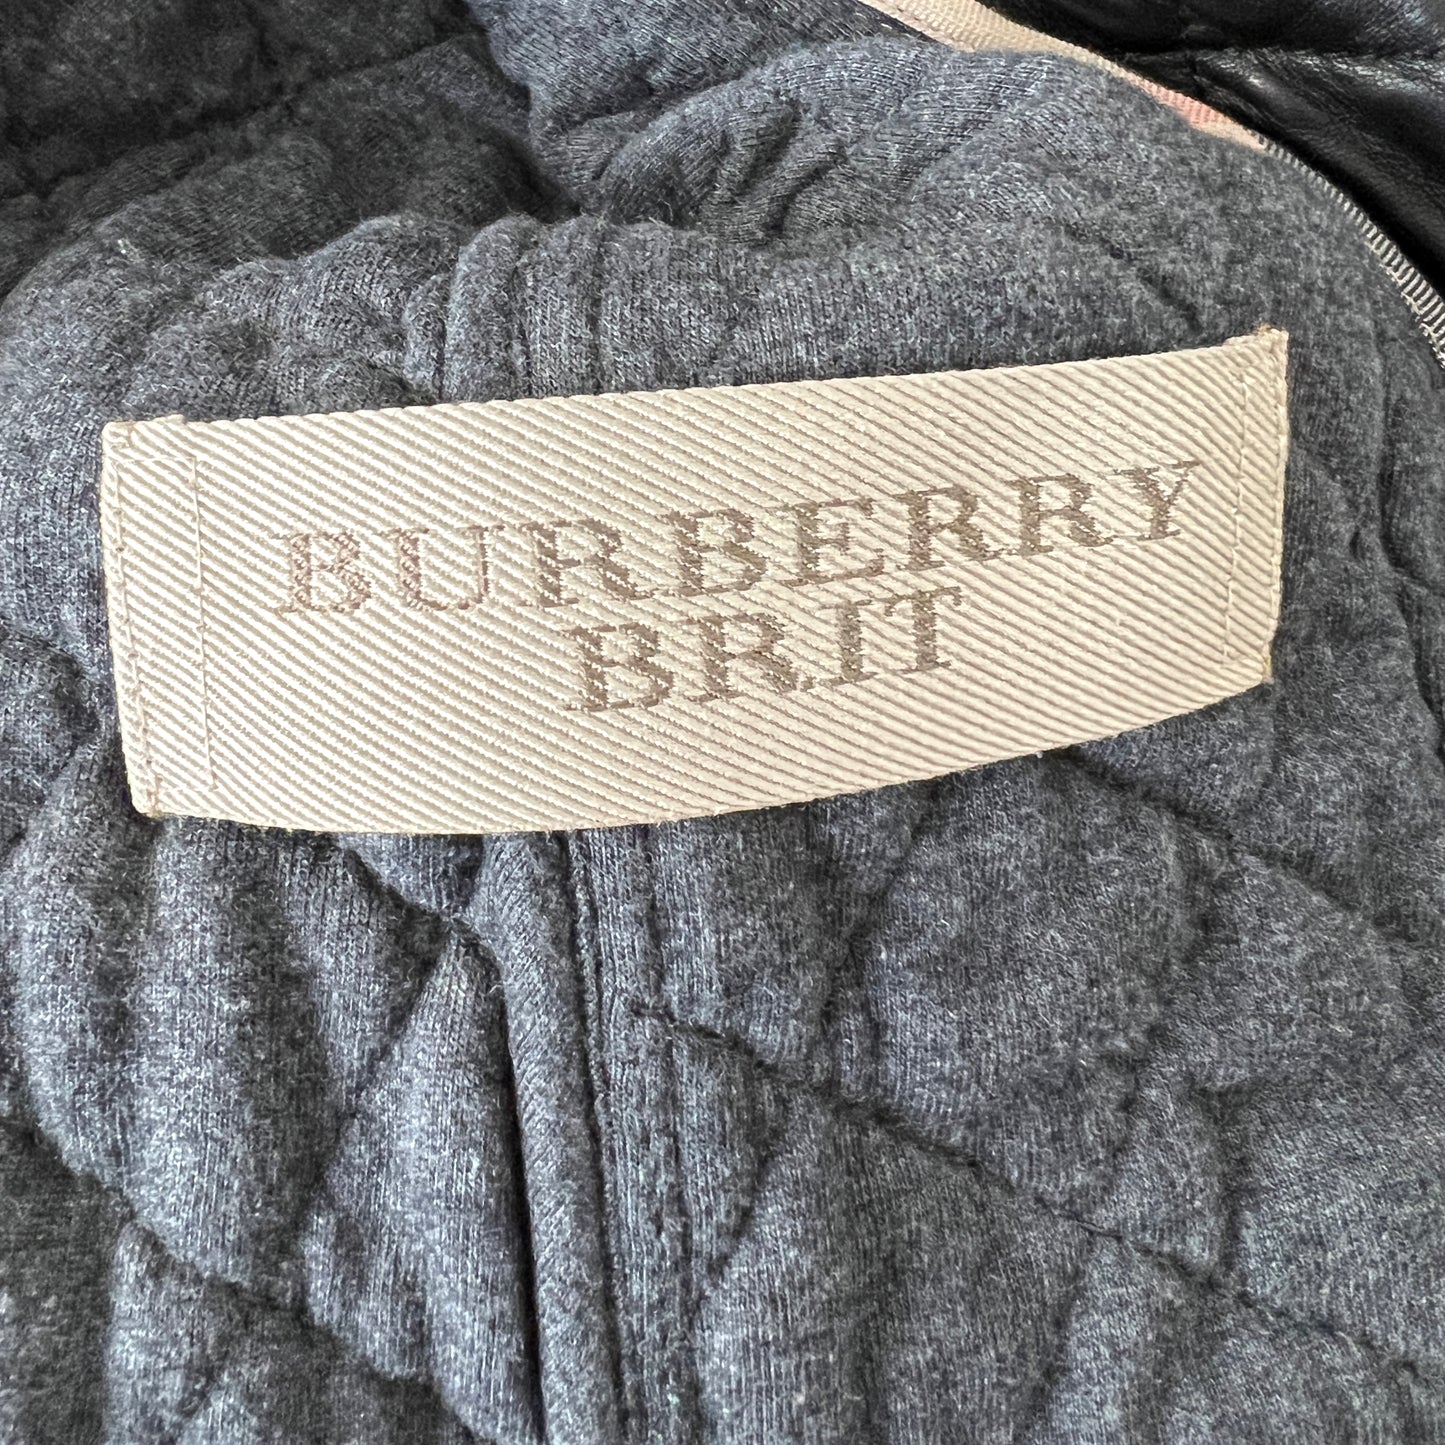 Burberry Brit Black Quilted Leather Double Breasted Trench Coat Jacket Size US 2